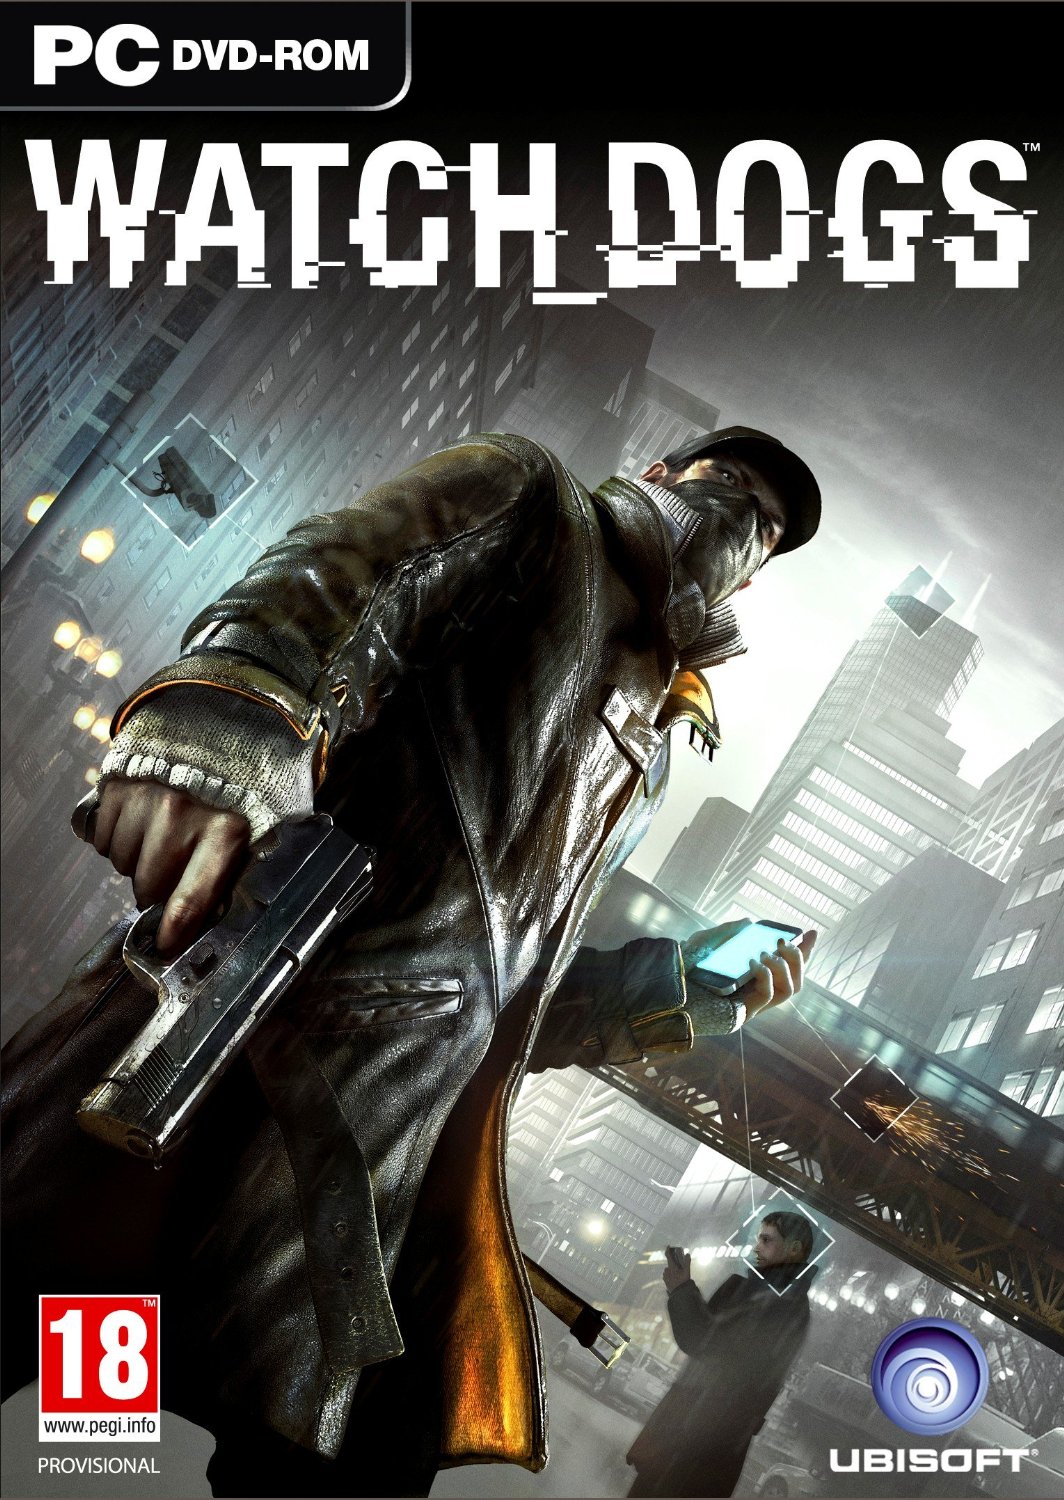 Watch Dogs CD Key for Ubisoft Connect: Standard Edition (Multi-Language  Region Free)